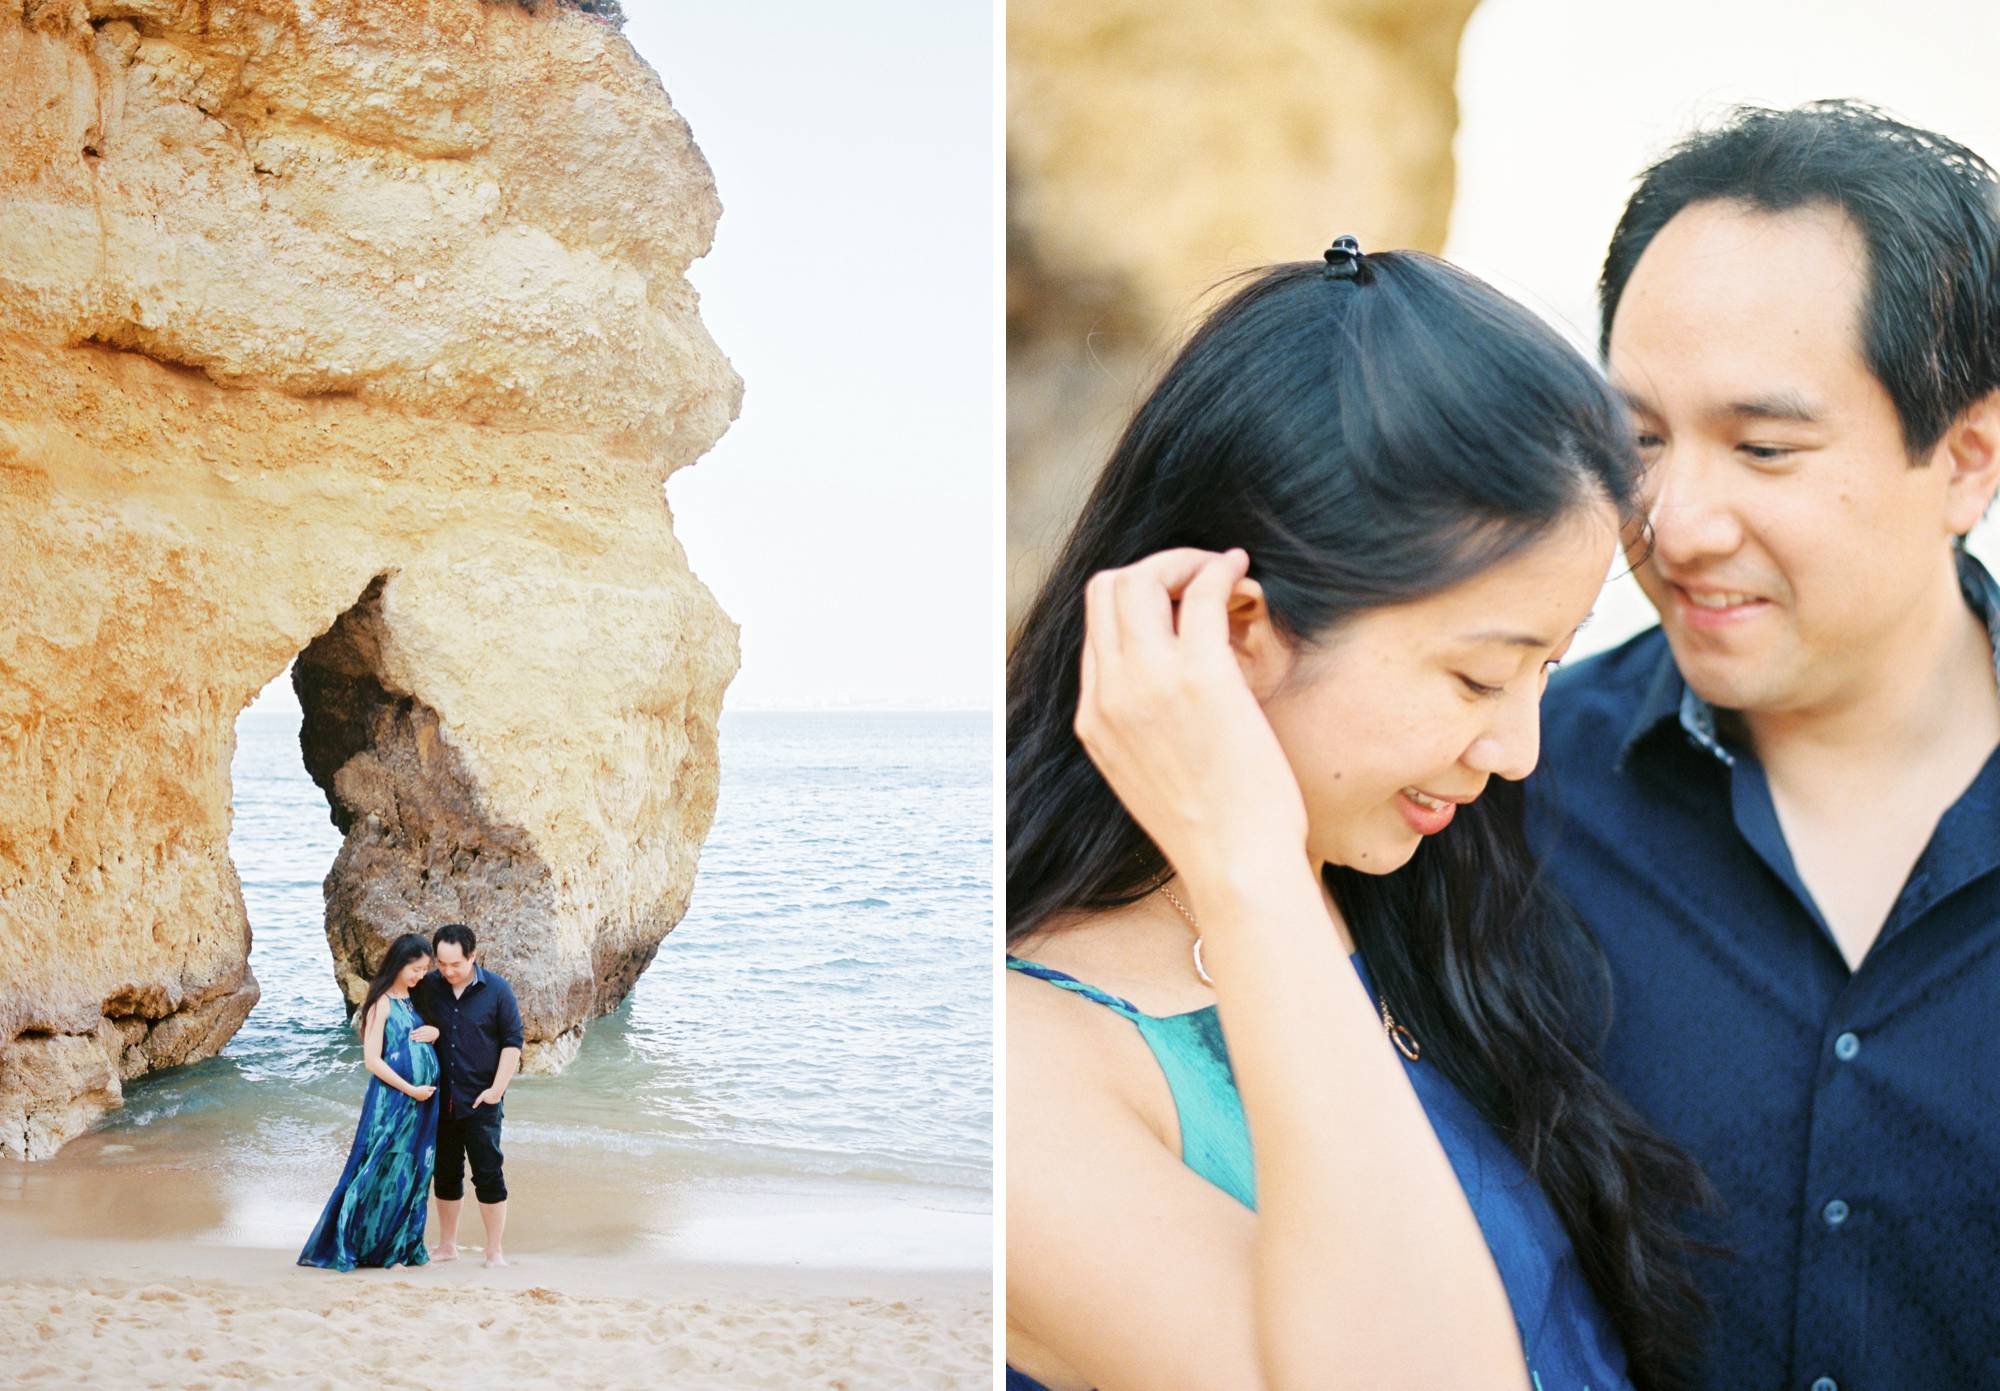 Photography Lagos Portugal - Maternity shoot by the sea